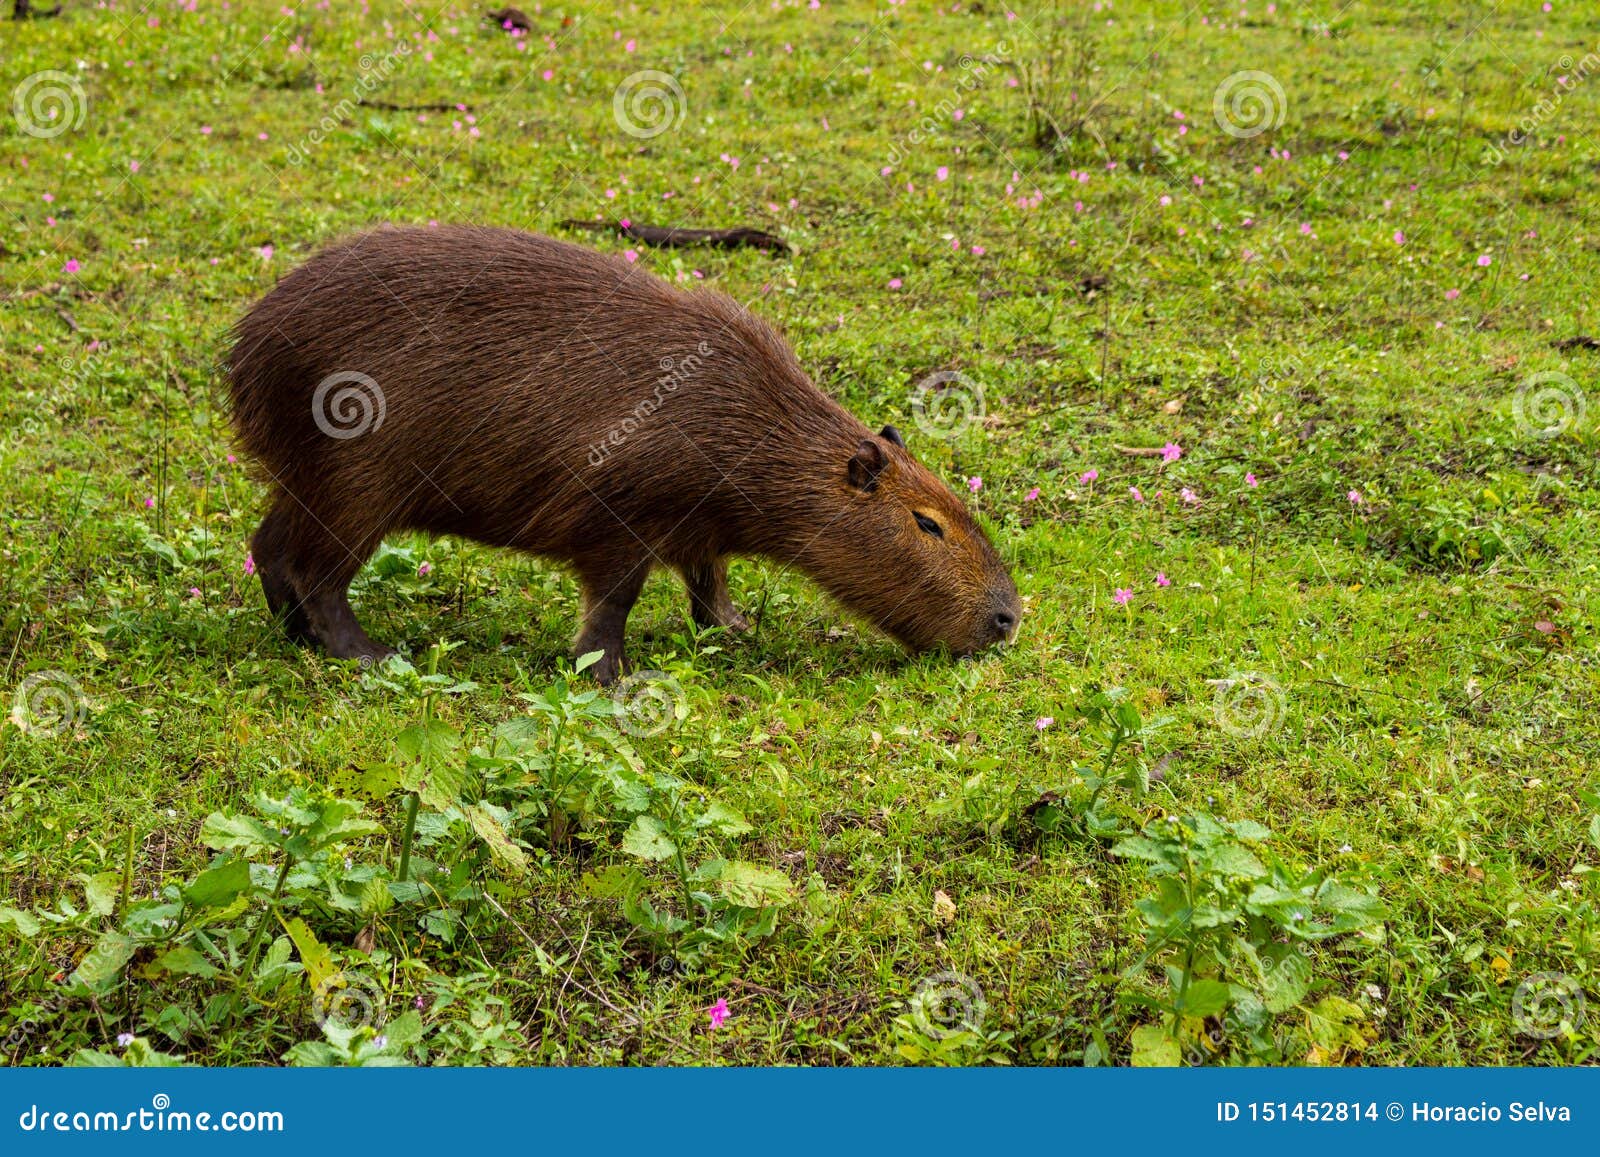 Large Herbivorous Animal of Brown Color from Tropical Zones. Live in the  Countryside and in Mud Puddles. Animals in the Pasture Stock Photo - Image  of biggest, furry: 151452814